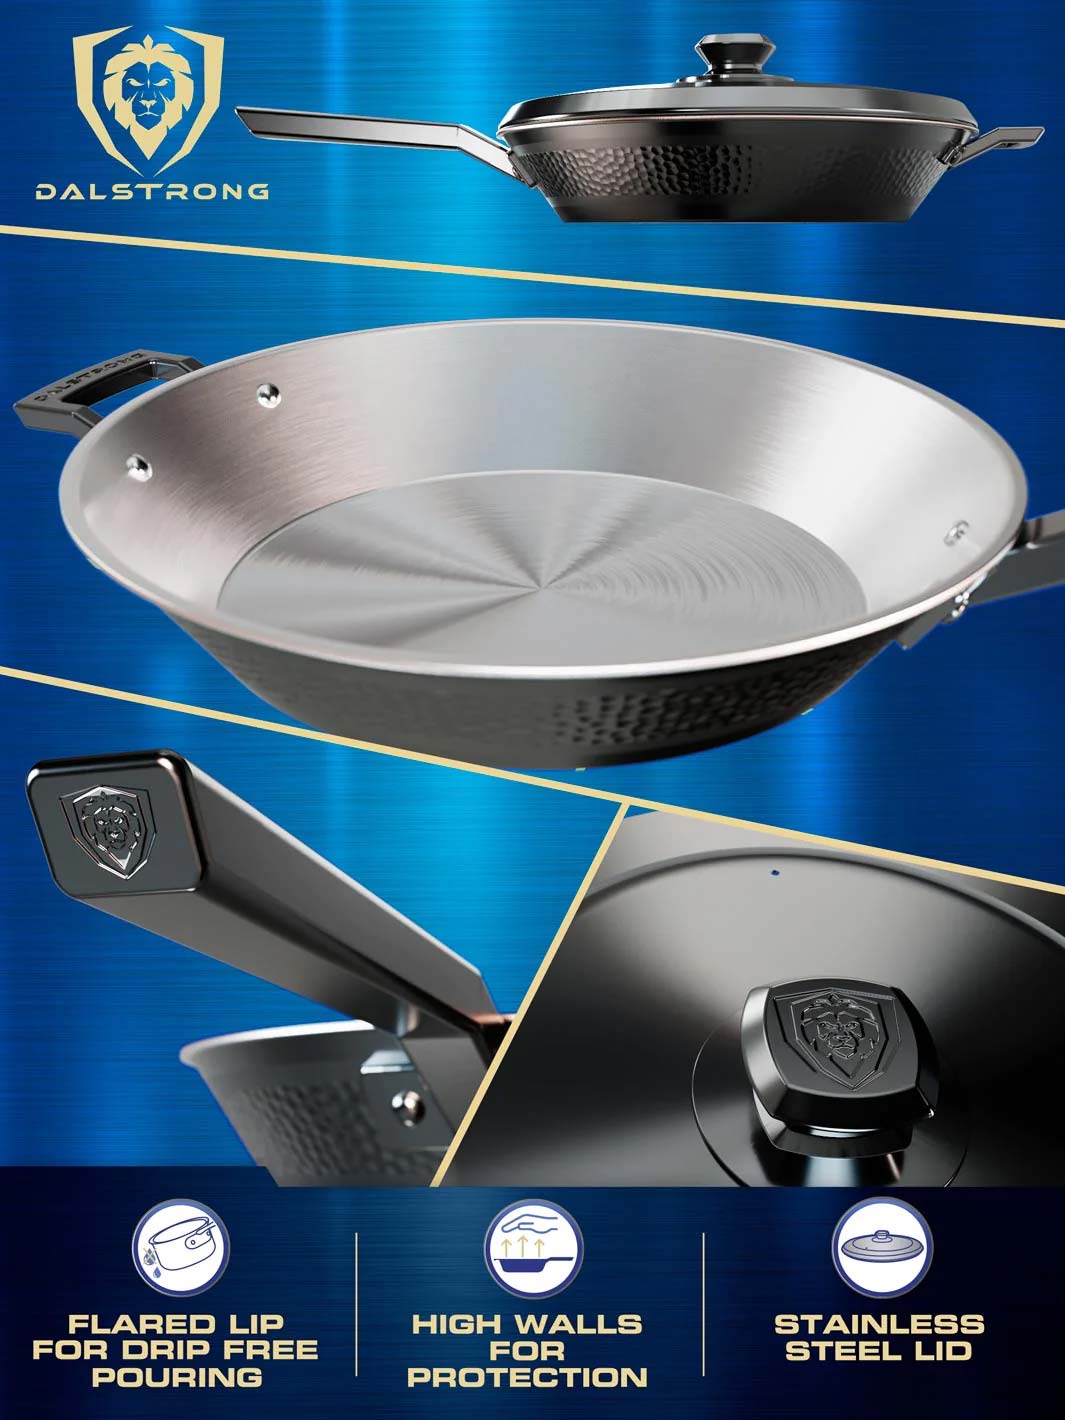 Dalstrong avalon series 12 inch frying pan and skillet hammered finish black showcasing it's high walls and stainless steel lid.